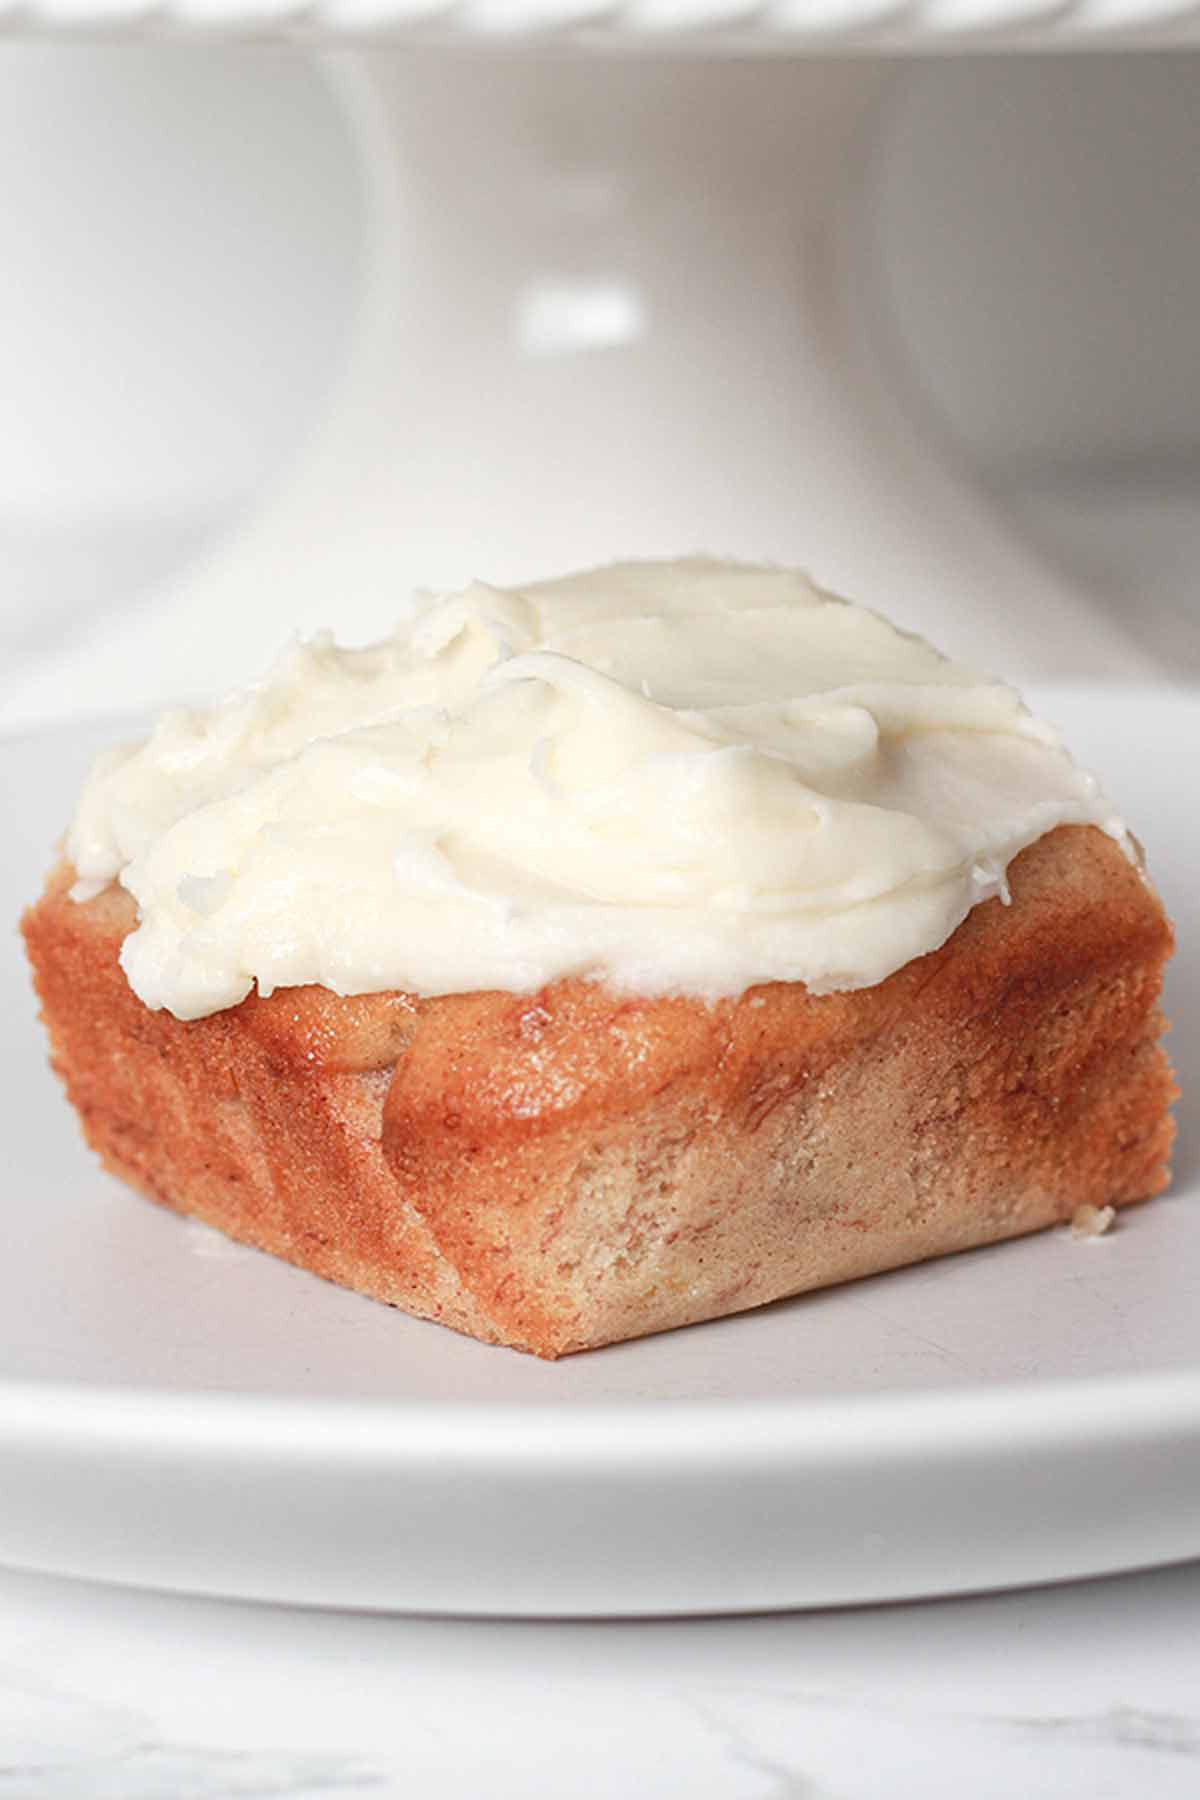 Banana Cake Slice With Cream Cheese Frosting On Top